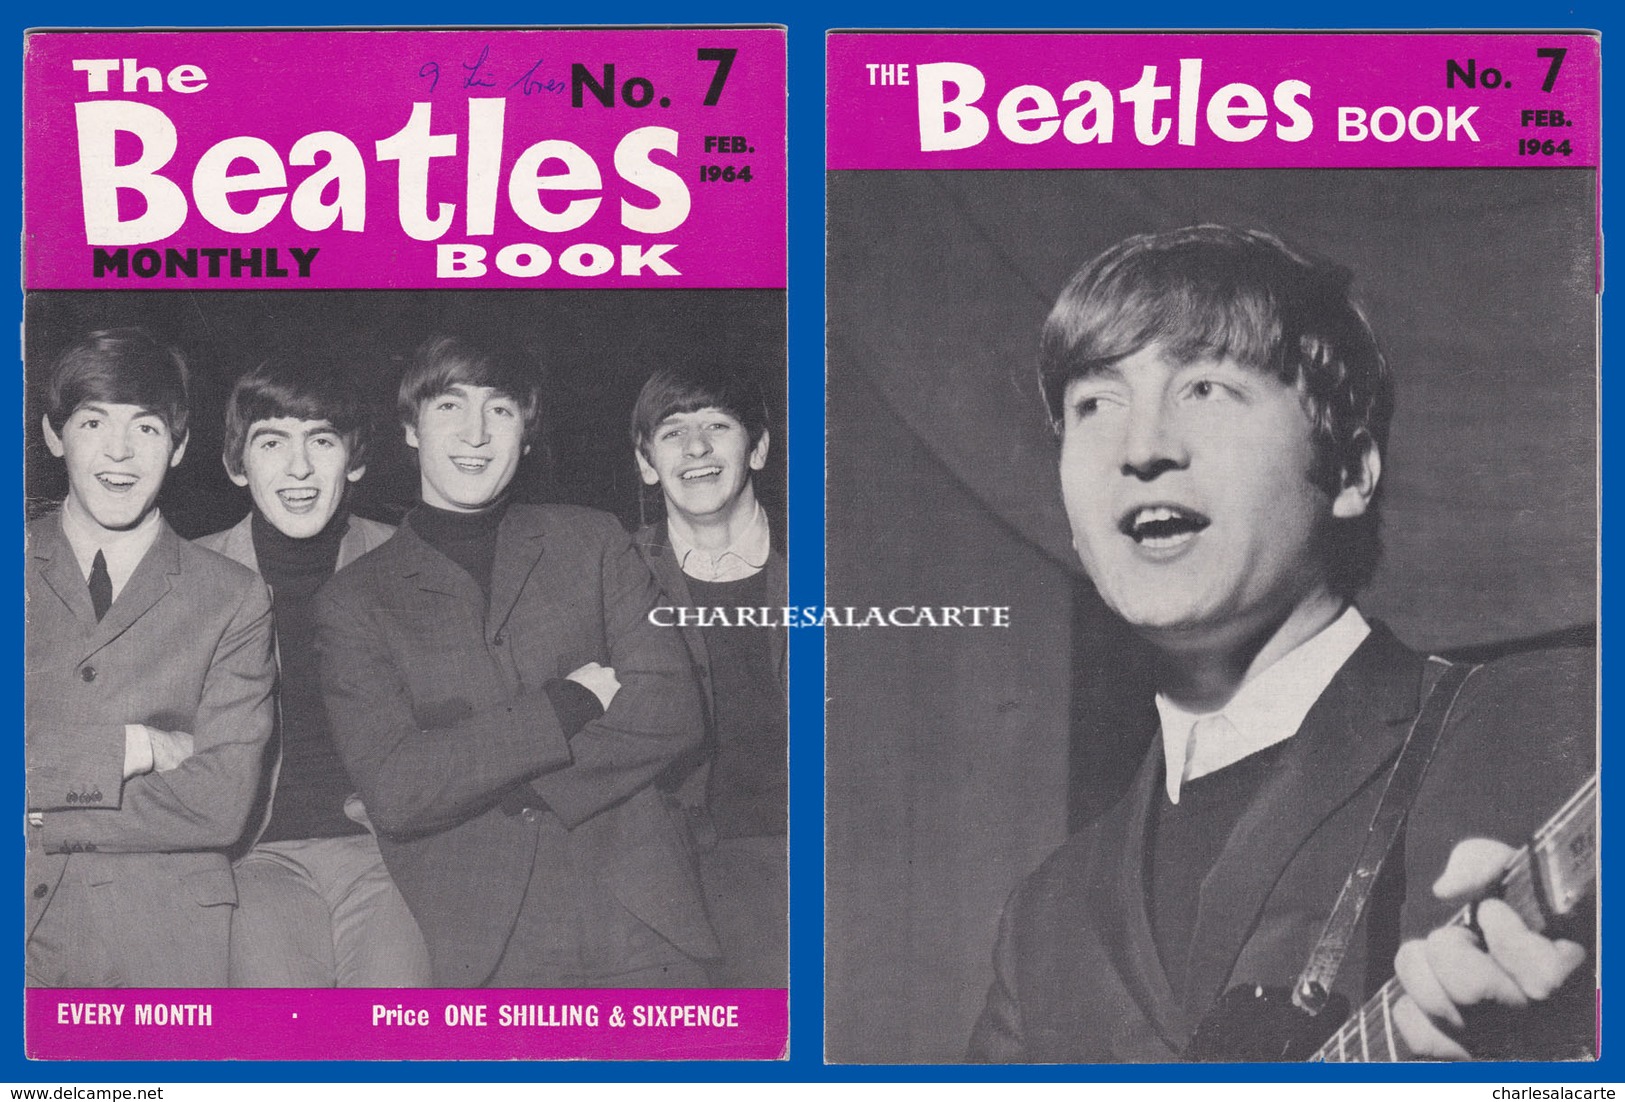 1964 FEBRUARY THE BEATLES MONTHLY BOOK No.7 AUTHENTIC SUBERB CONDITION SEE THE SCAN - Divertissement